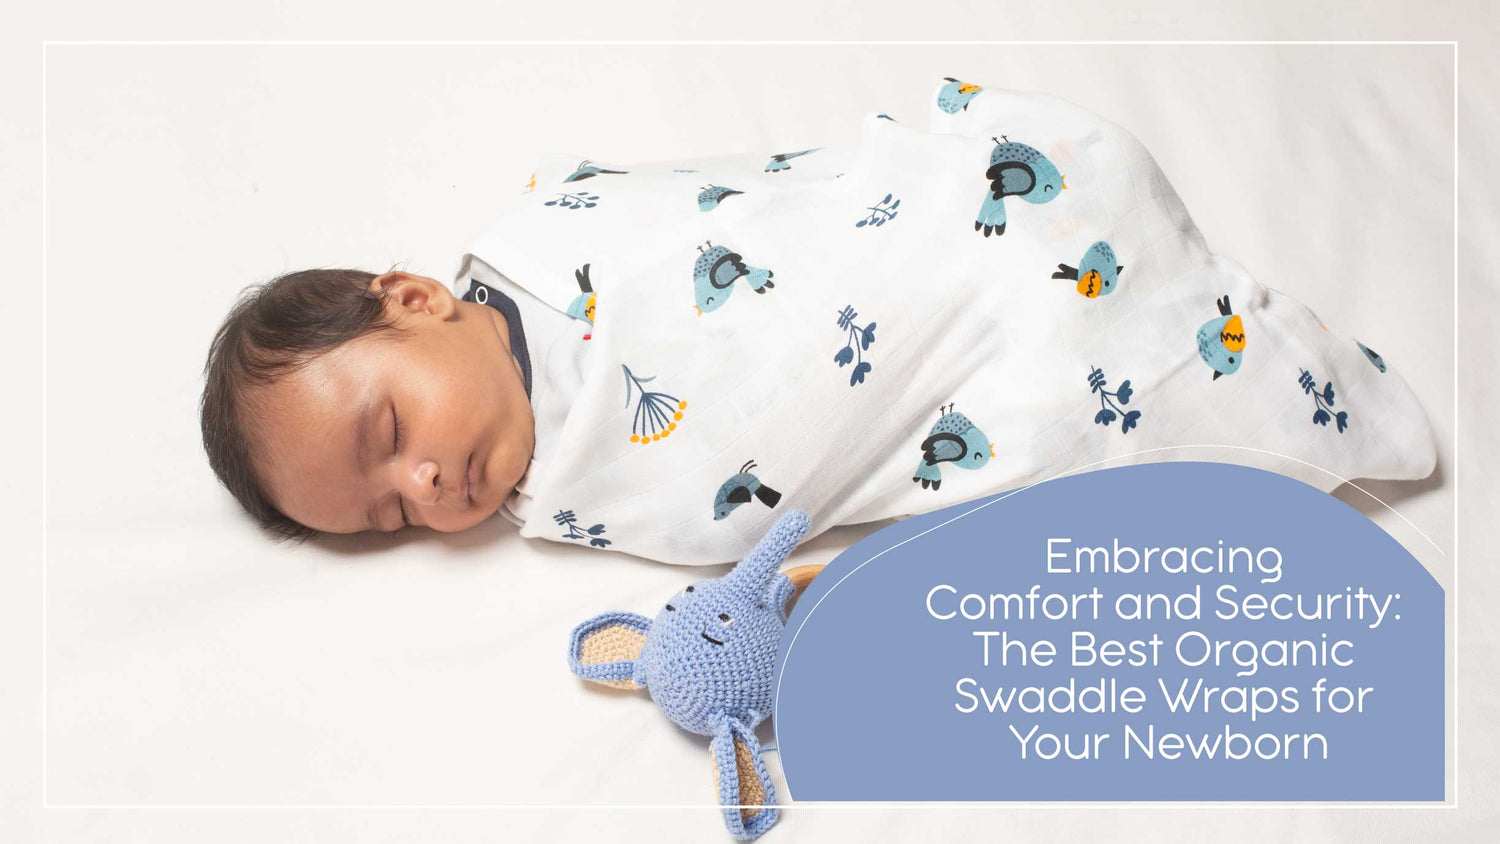 Embracing Comfort and Security: The Best Organic Swaddle Wraps for Your Newborn